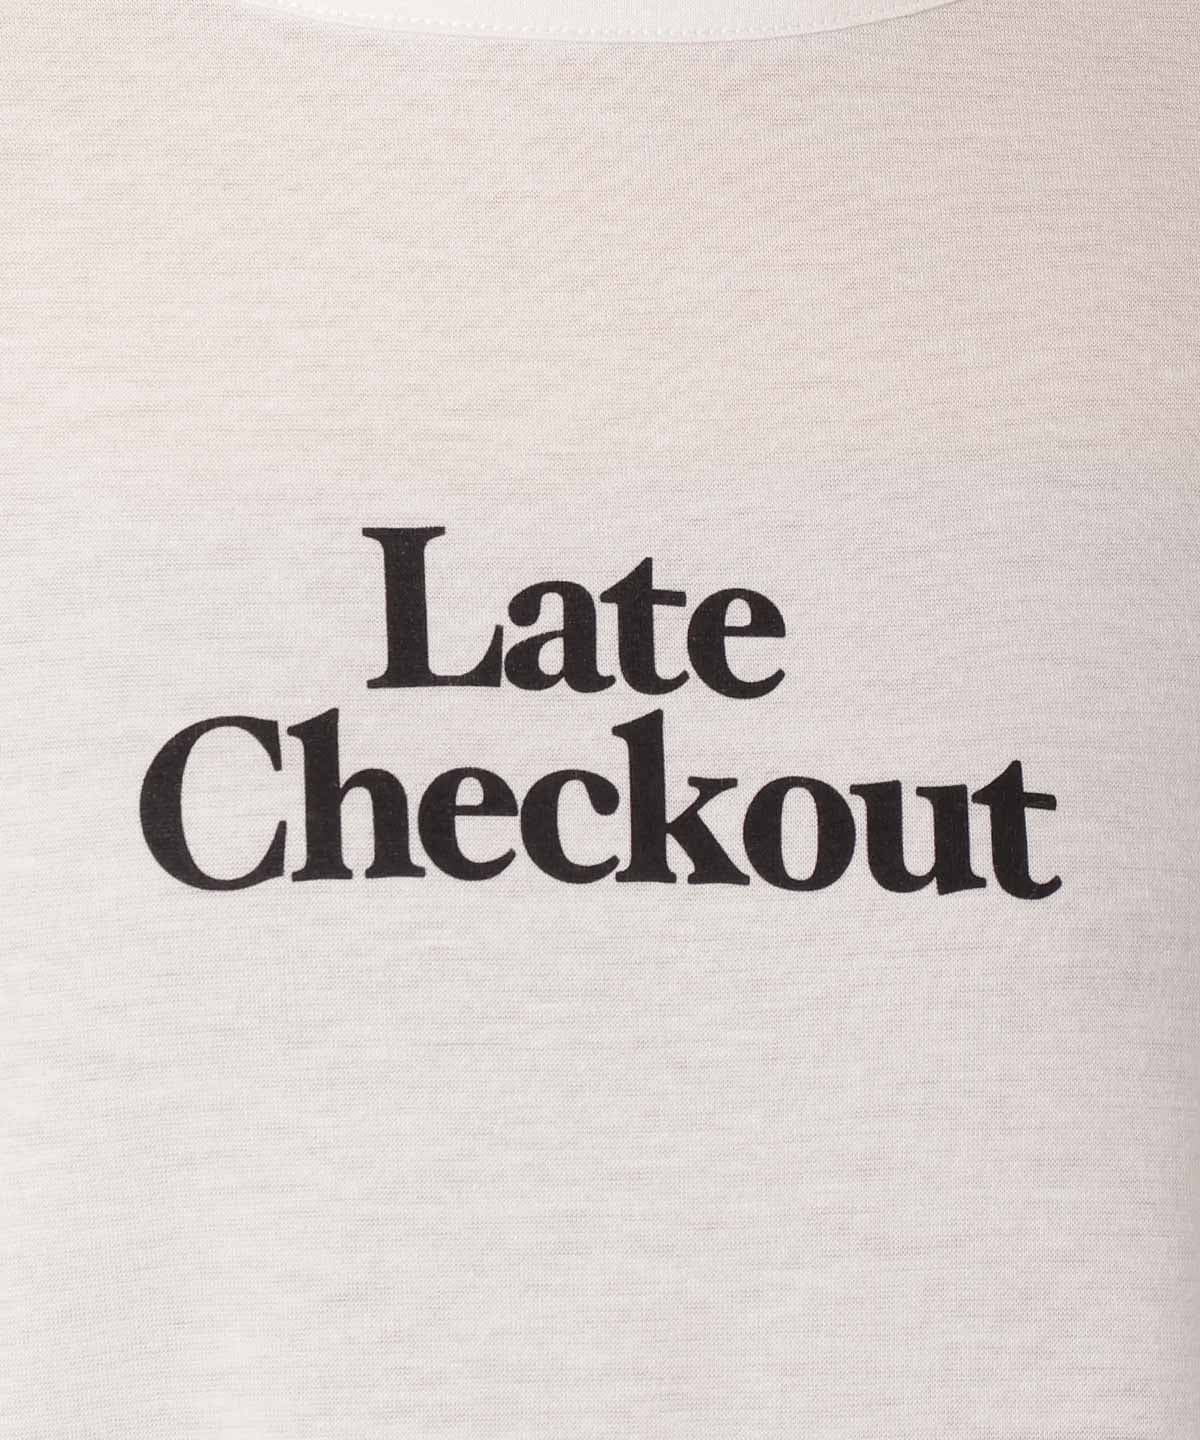 Late Checkout プリントTシャツ